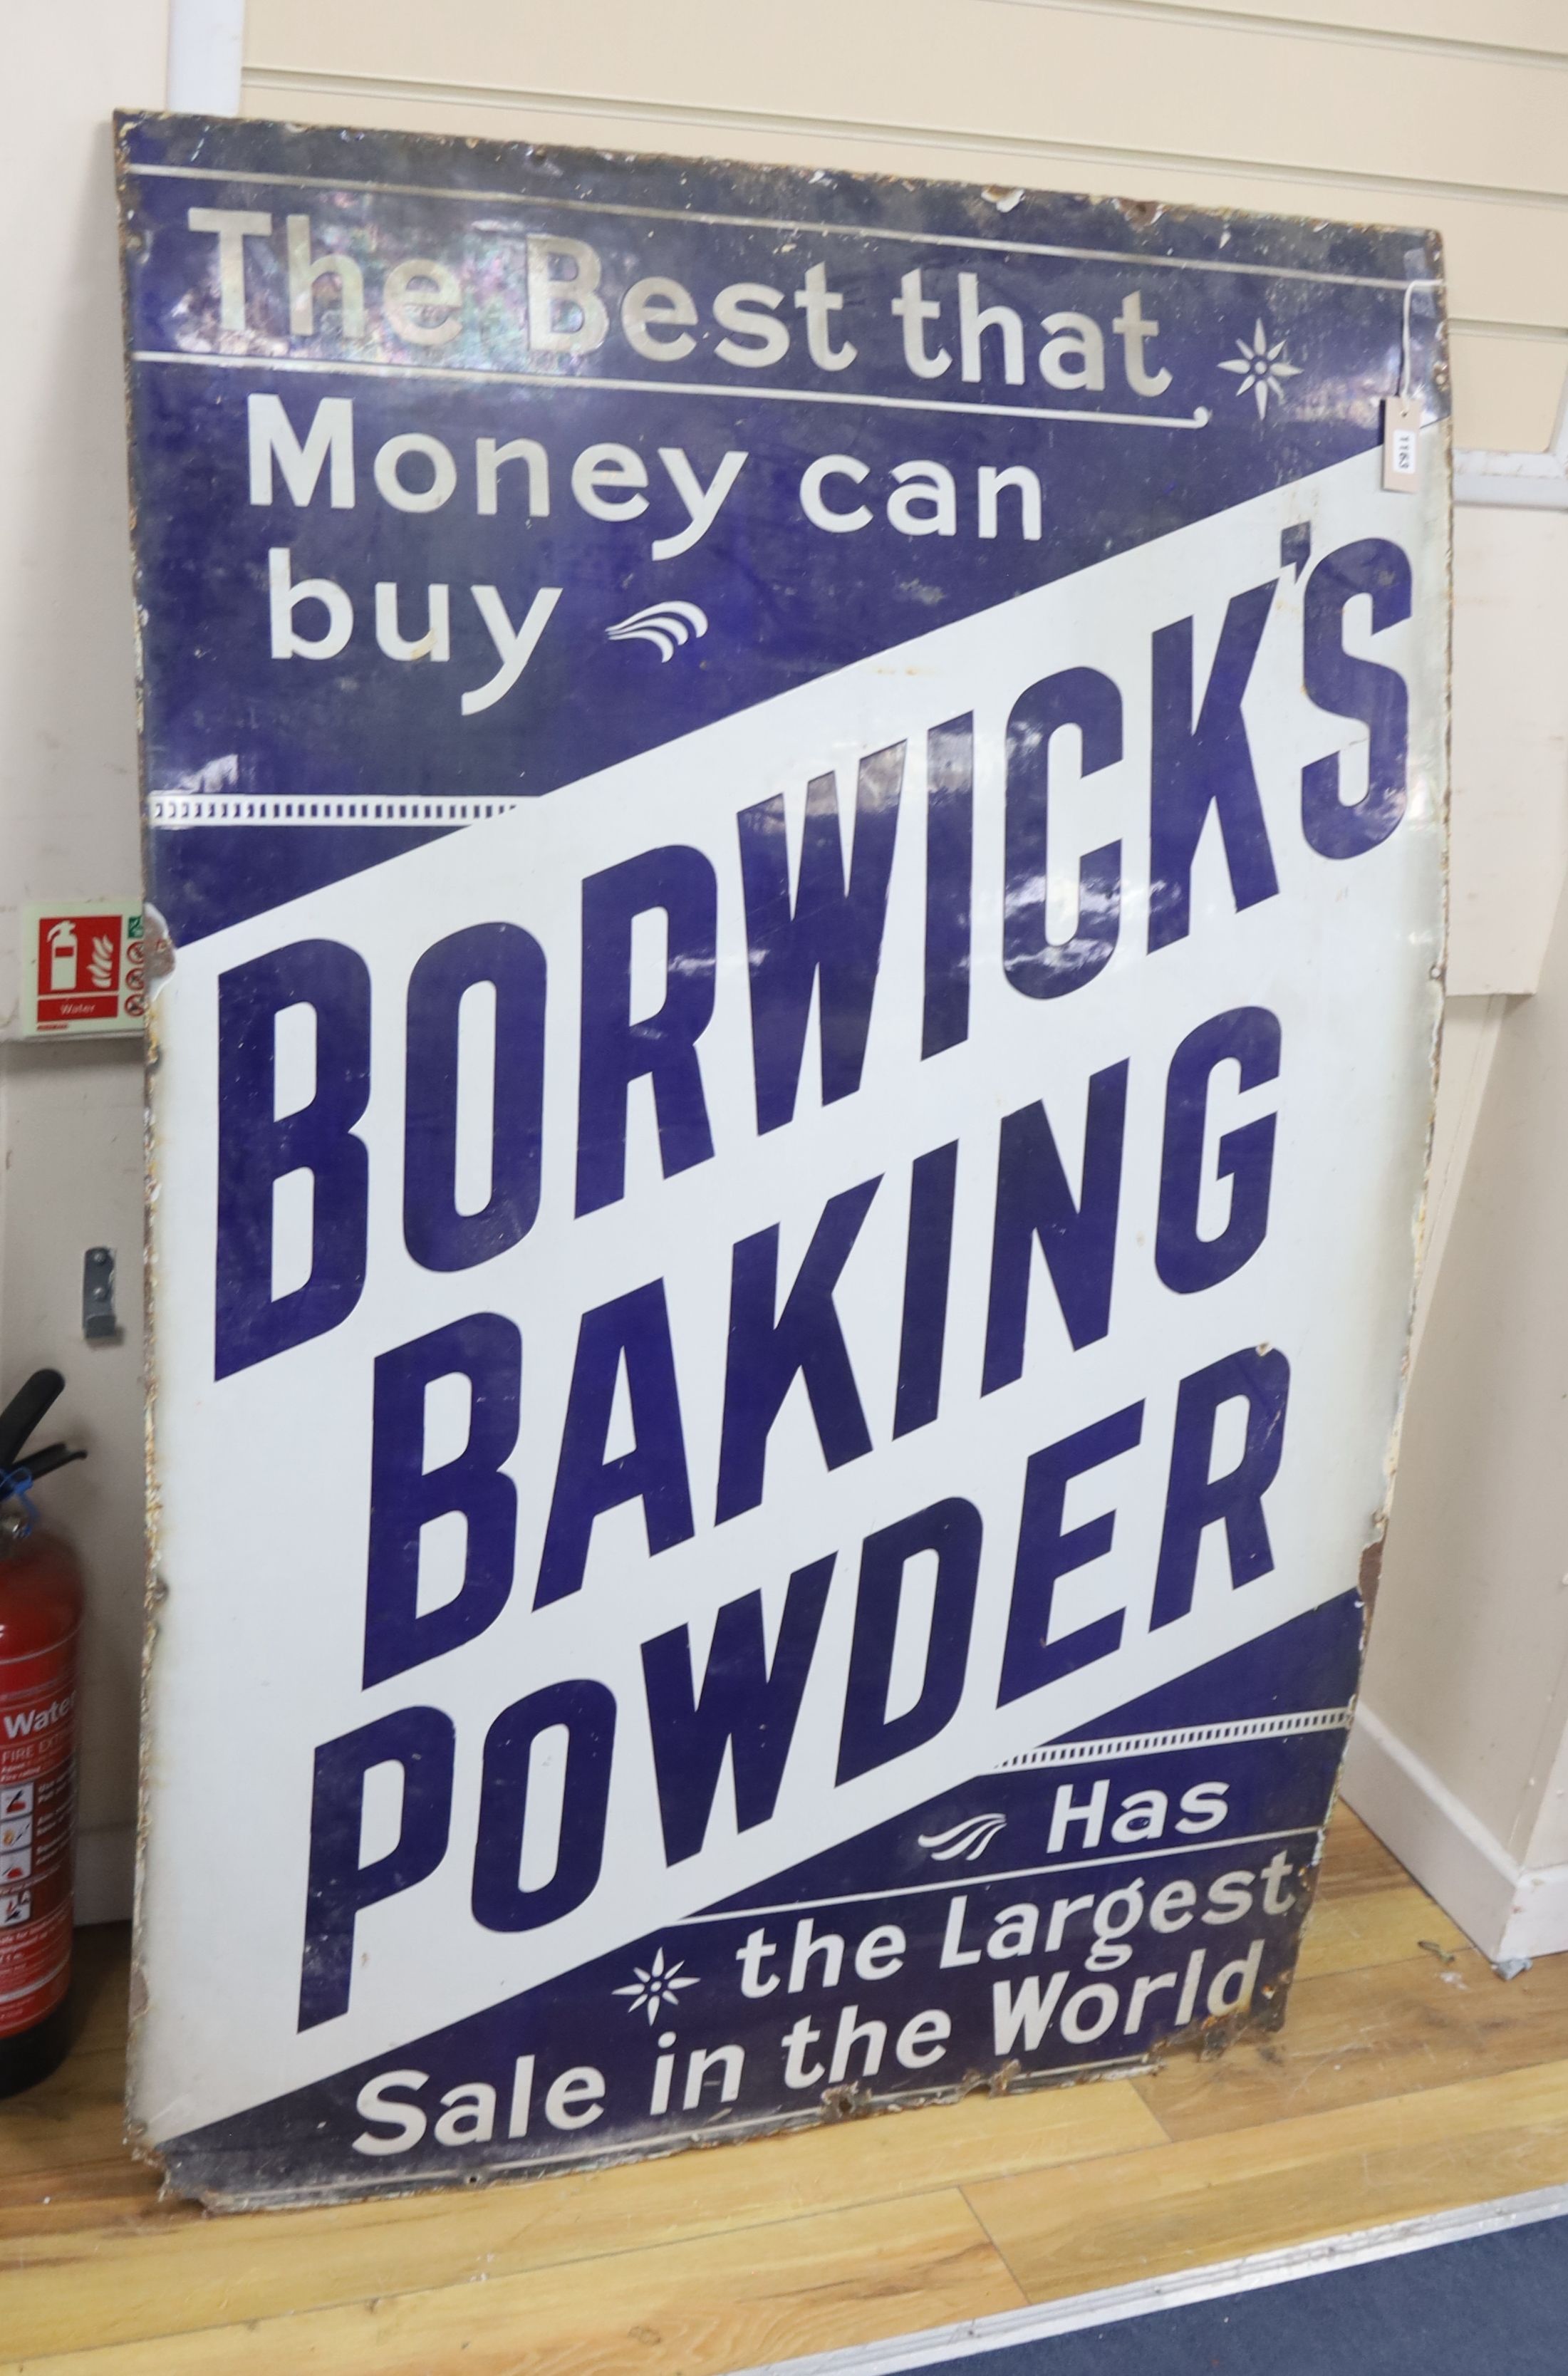 A large vintage enamelled advertising sign for Borwick's Baking Powder, width 102cm, height 154cm